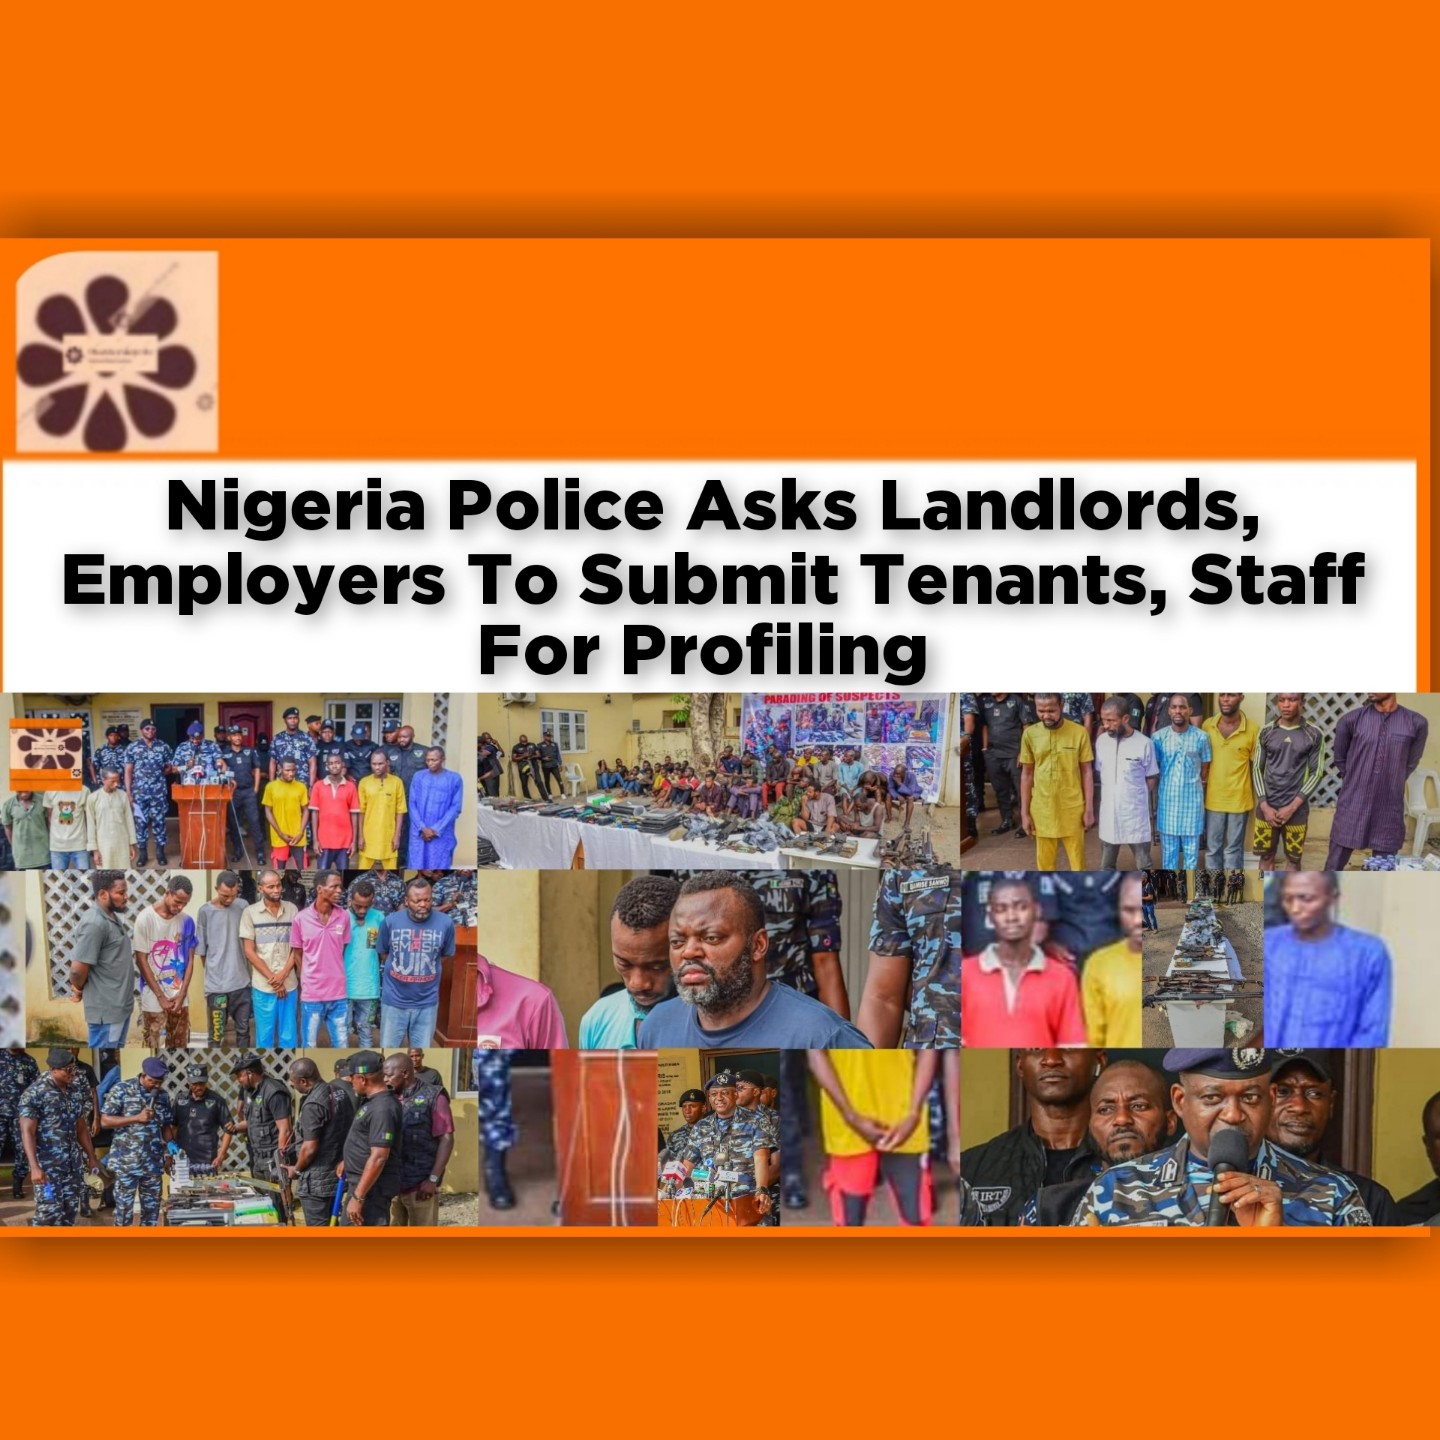 Nigeria Police Asks Landlords, Employers To Submit Tenants, Staff For Profiling ~ OsazuwaAkonedo #Daniels #Employers #Kidnappers #Landlords #NED #Nwoko #Police #Regina #Staff #Tenants